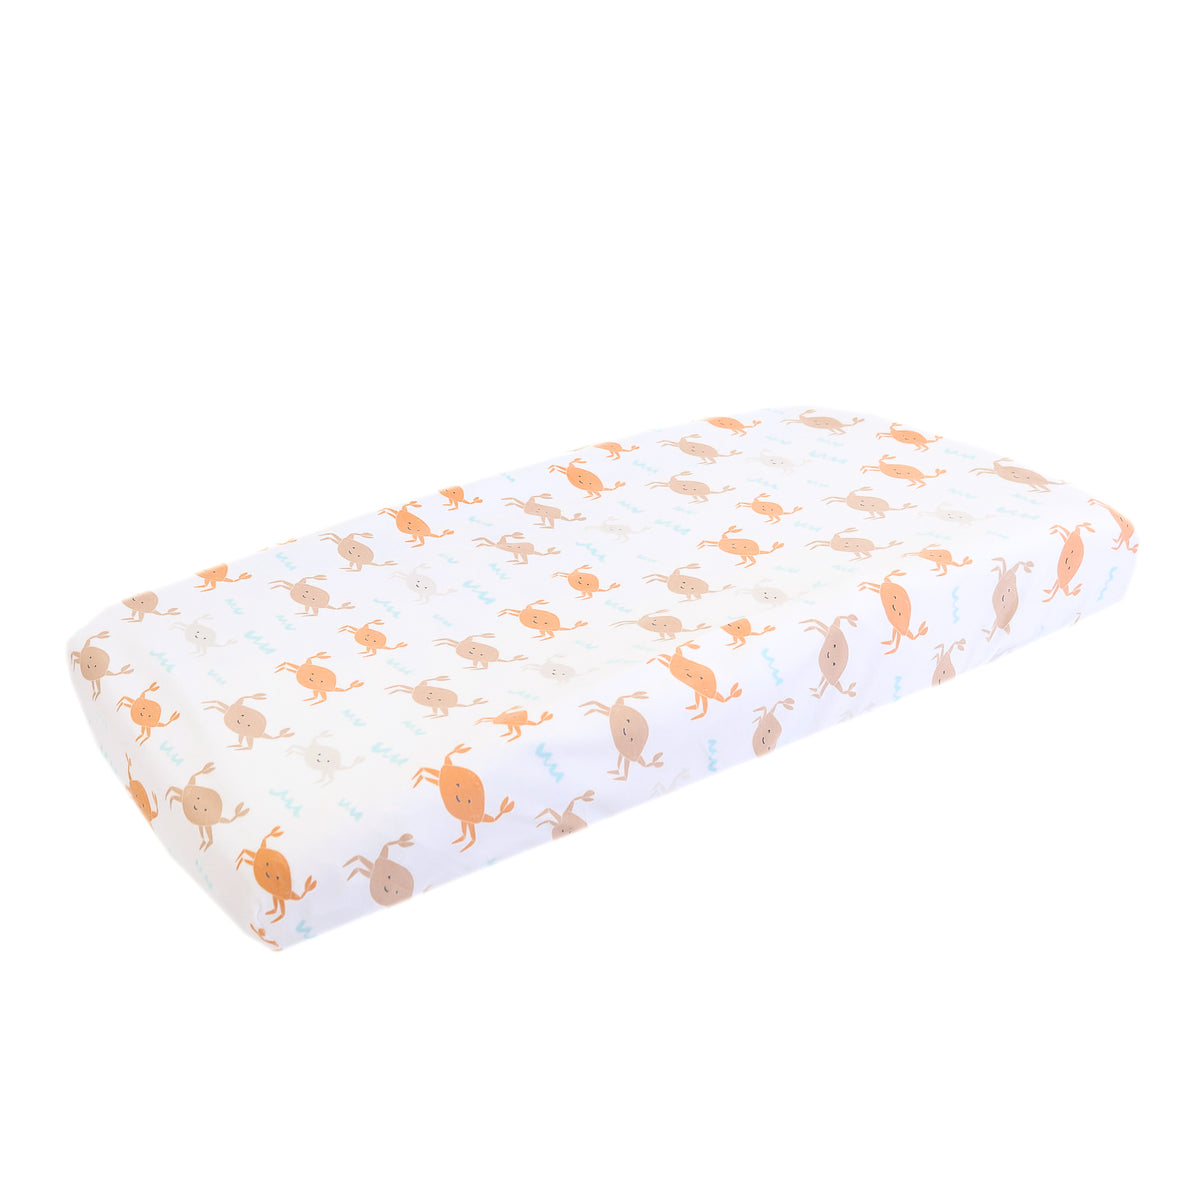 Premium Knit Diaper Changing Pad Cover - Tide